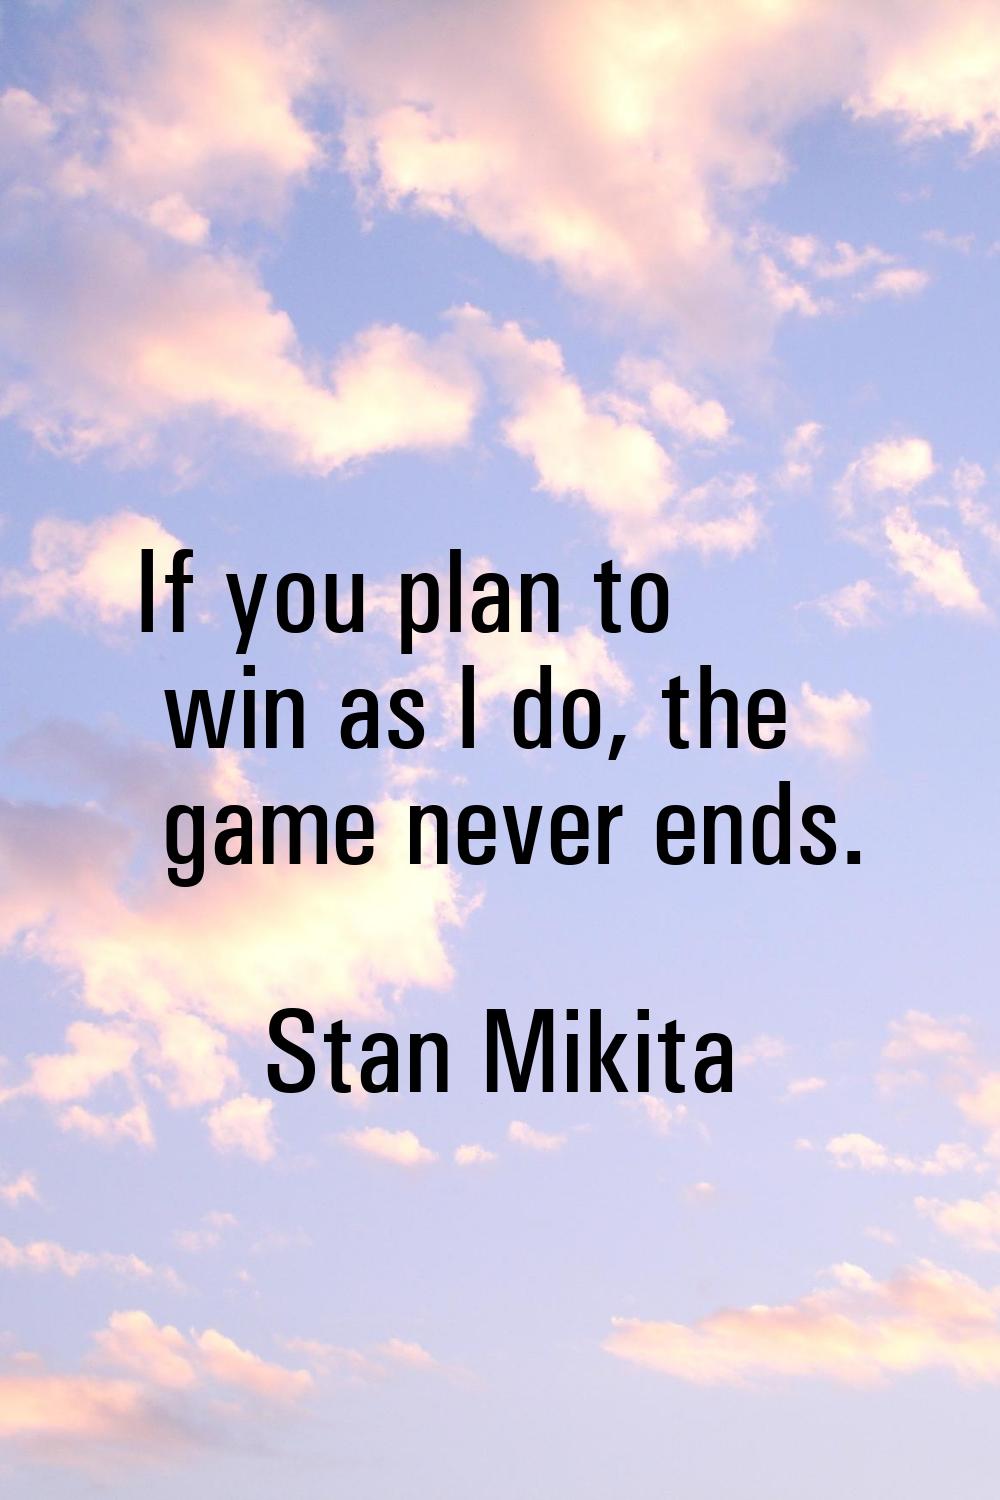 If you plan to win as I do, the game never ends.